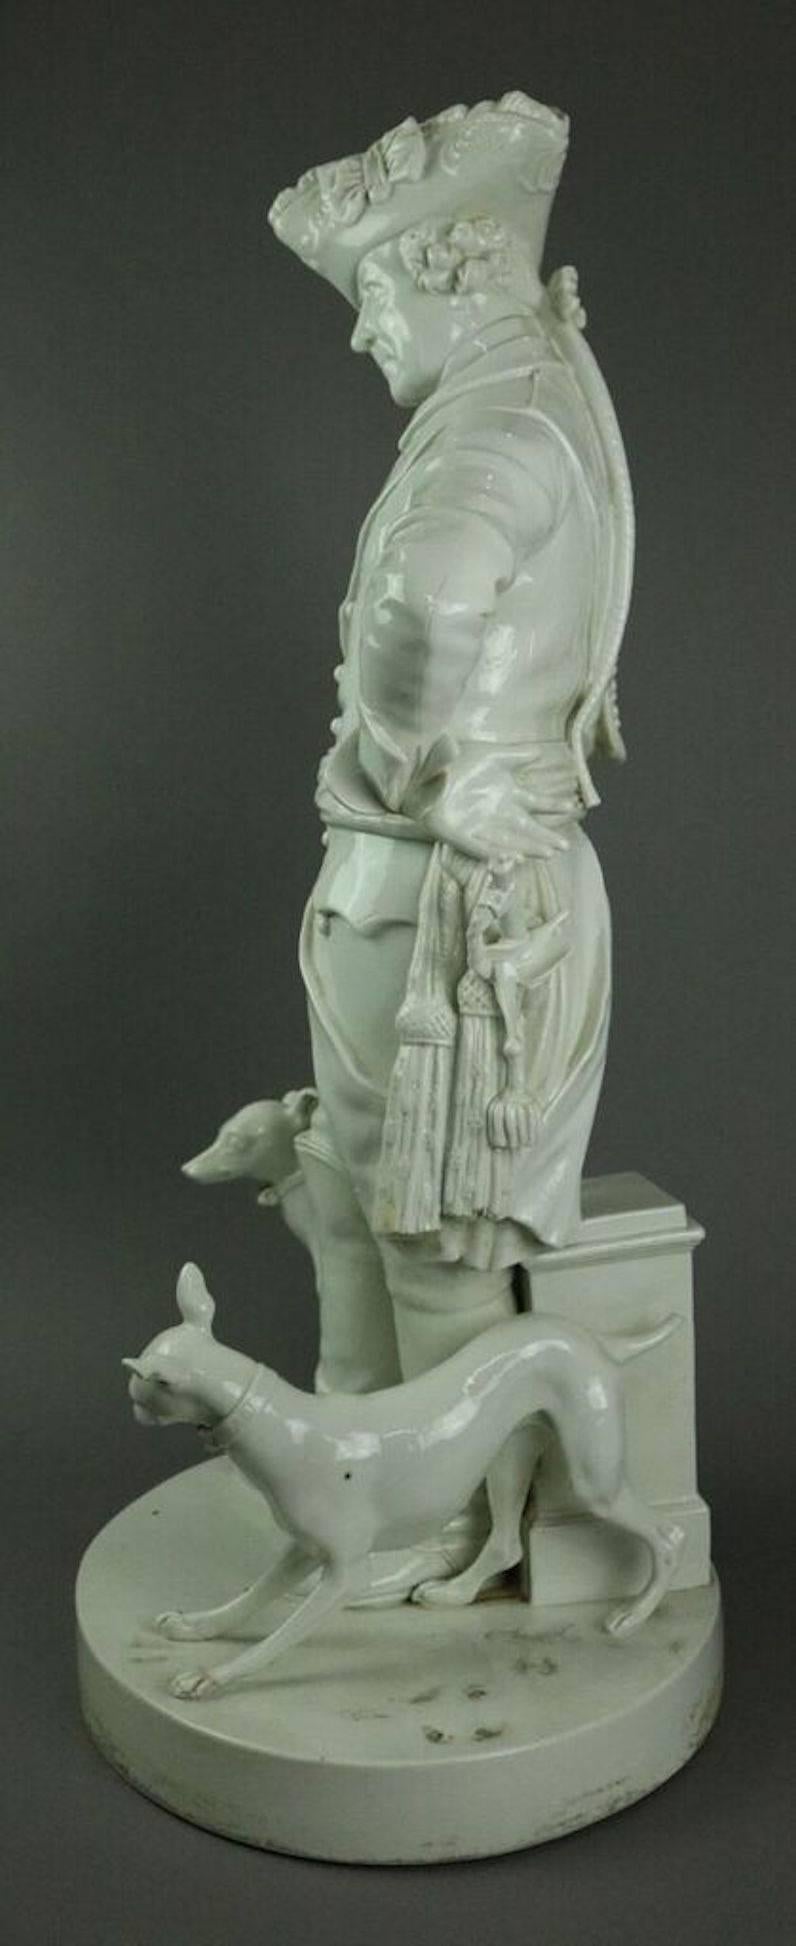 Oversized antique "Frederick The Great with Two Whippets" Blanc De Chine porcelain heroic military sculpture, 19th century Dresden, maker's mark possibly Rudolstadt (1720-1790).